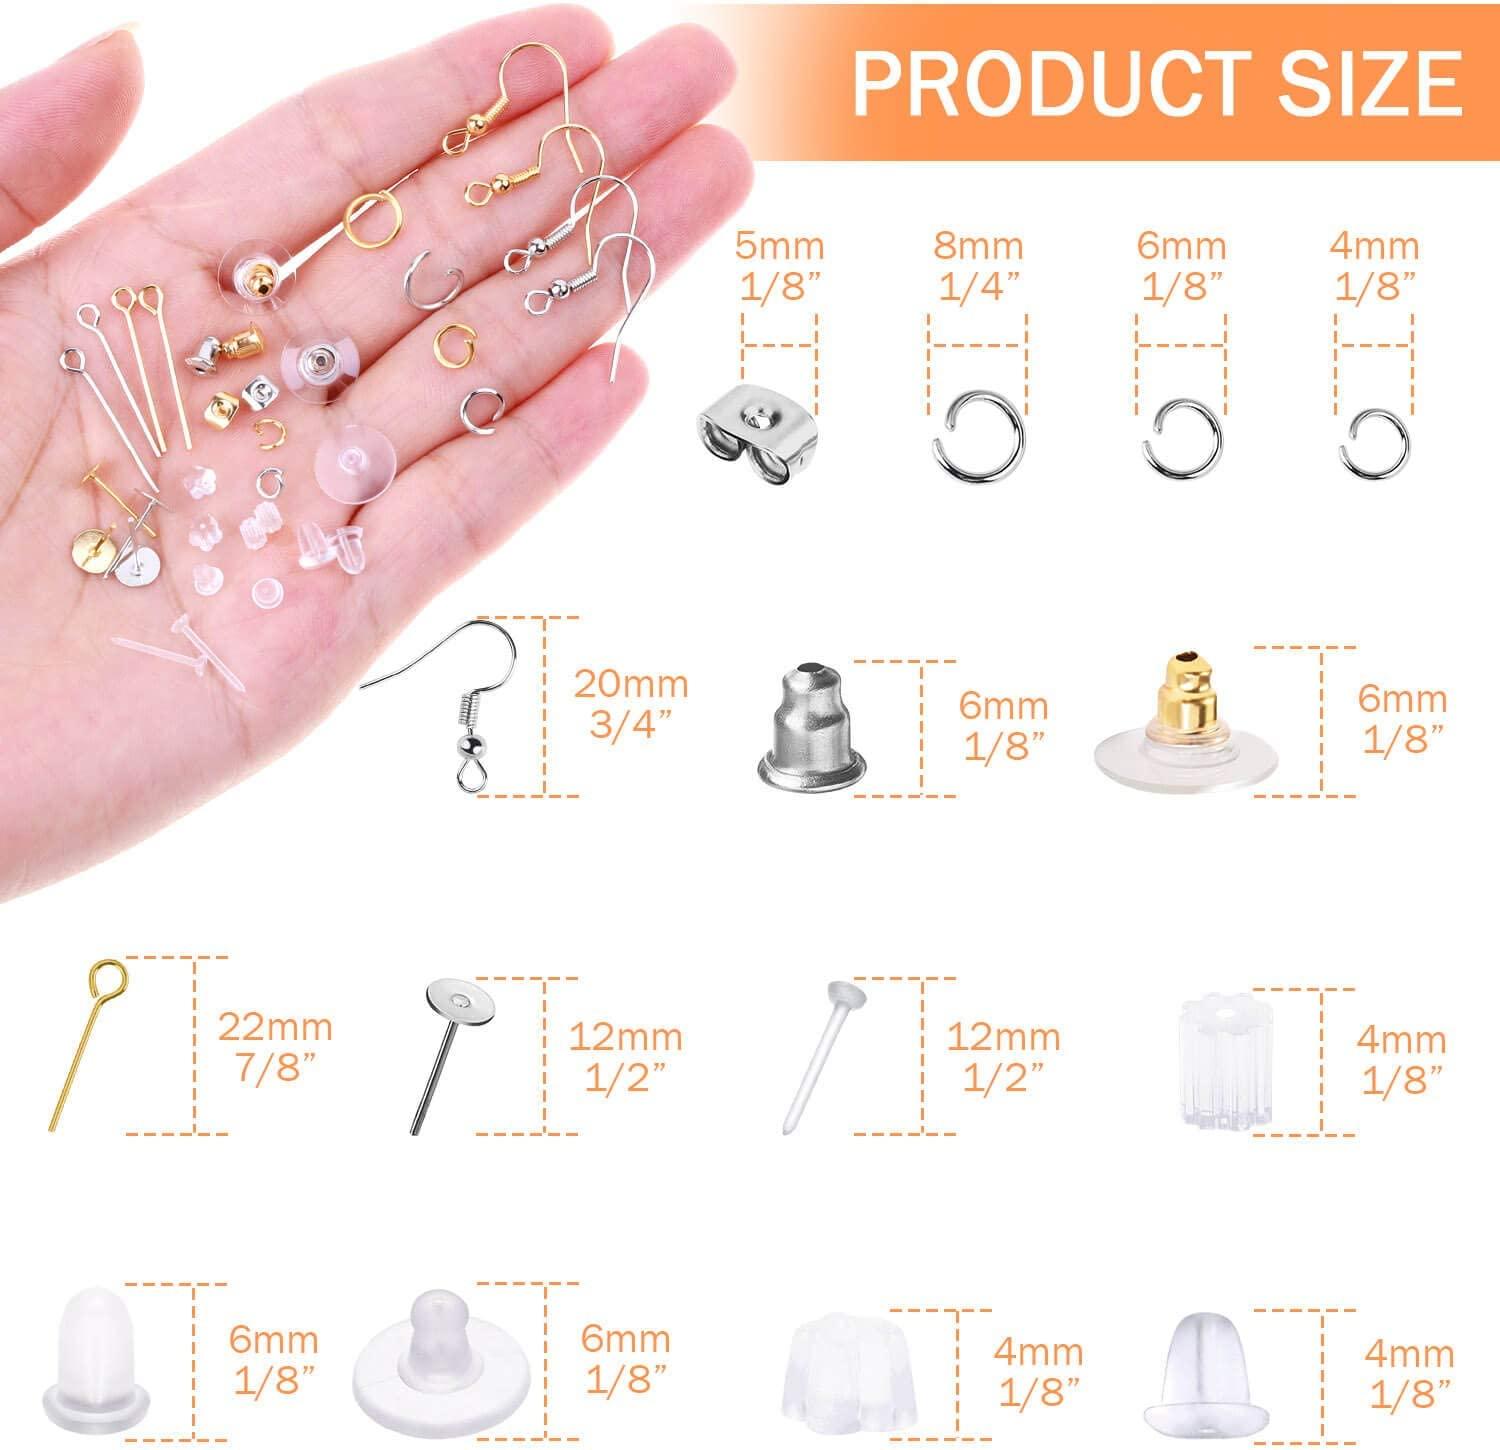 Earring Hooks, Anezus 1900Pcs Earring Making Supplies Kit with Jewelry  Hooks, Fish Hook Earrings, Earring Backs, Jump Rings for Jewelry Making and